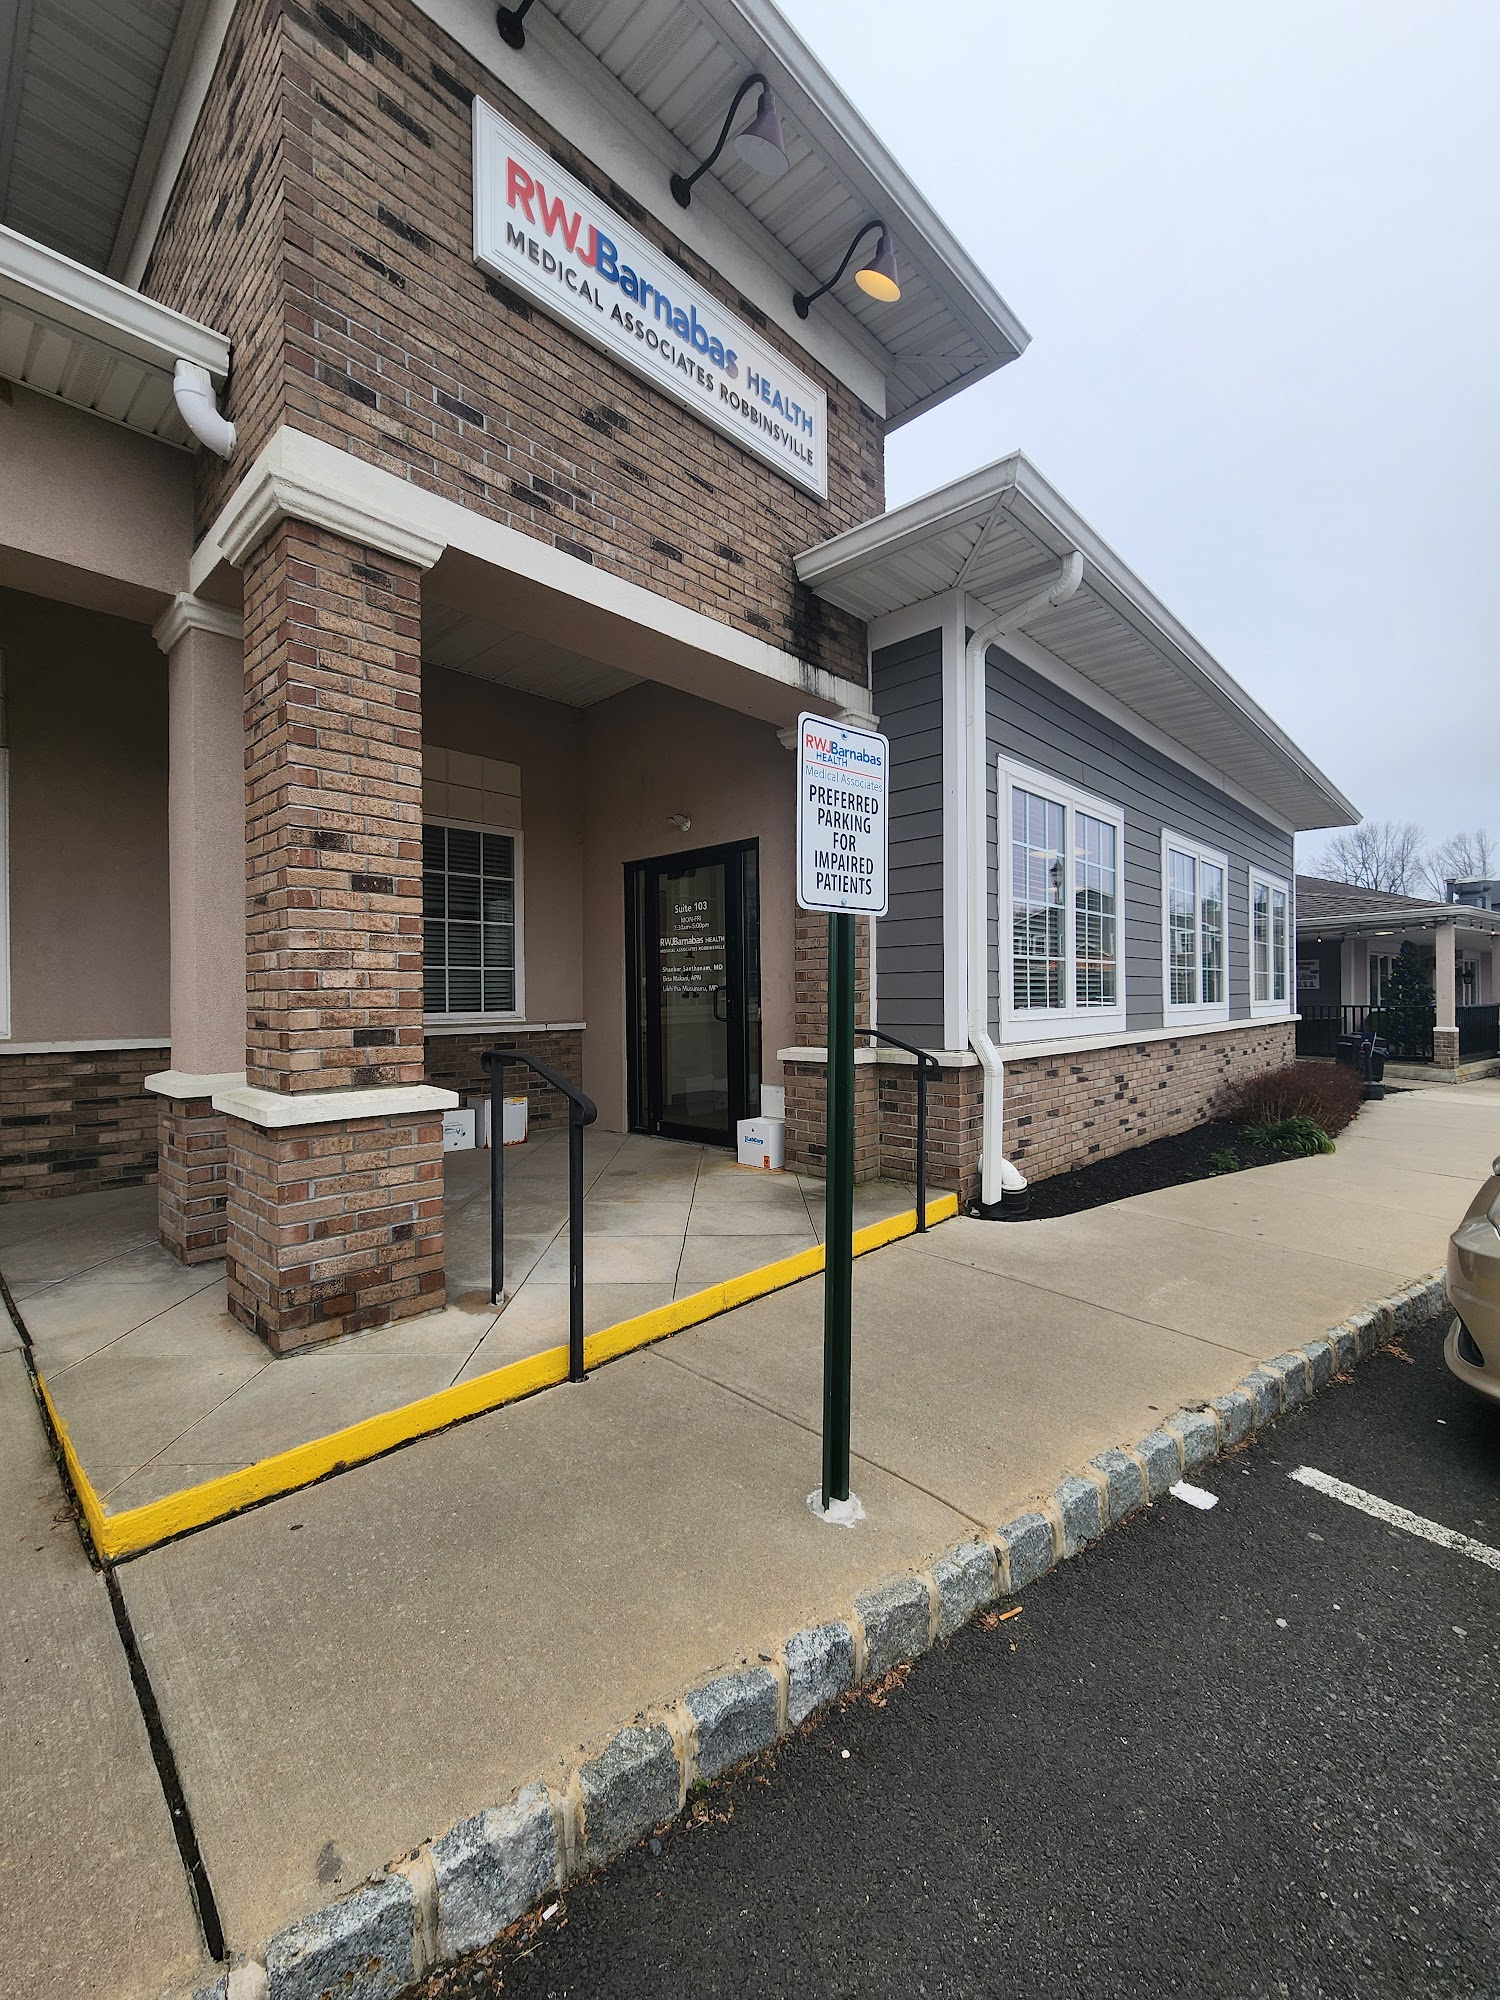 RWJ Medical Associates Primary Care 17 Main St, Robbinsville New Jersey 08691